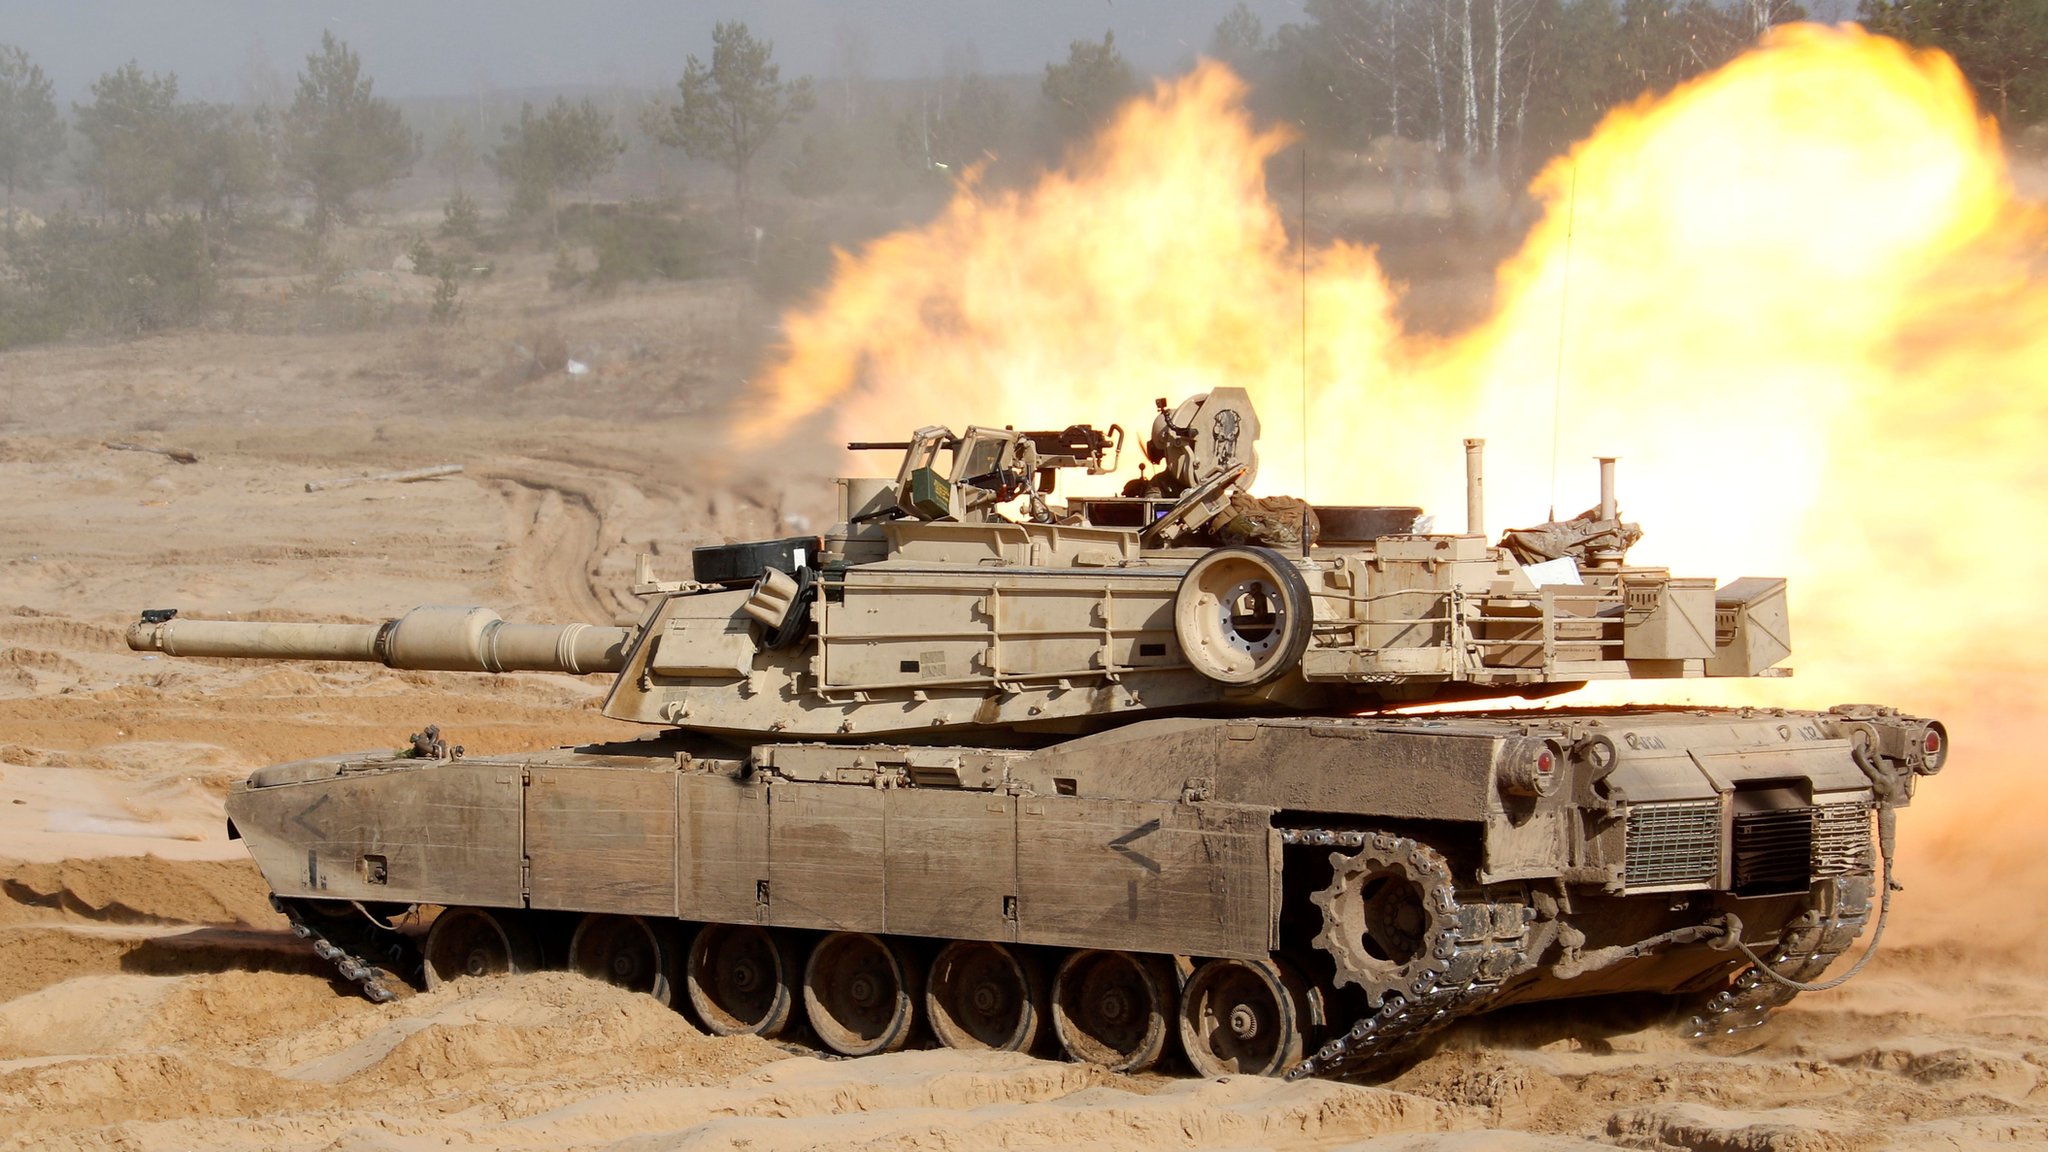 Abrams Is The Best Main Battle Tank In The World. But Improving It Should  Still Be A Priority.